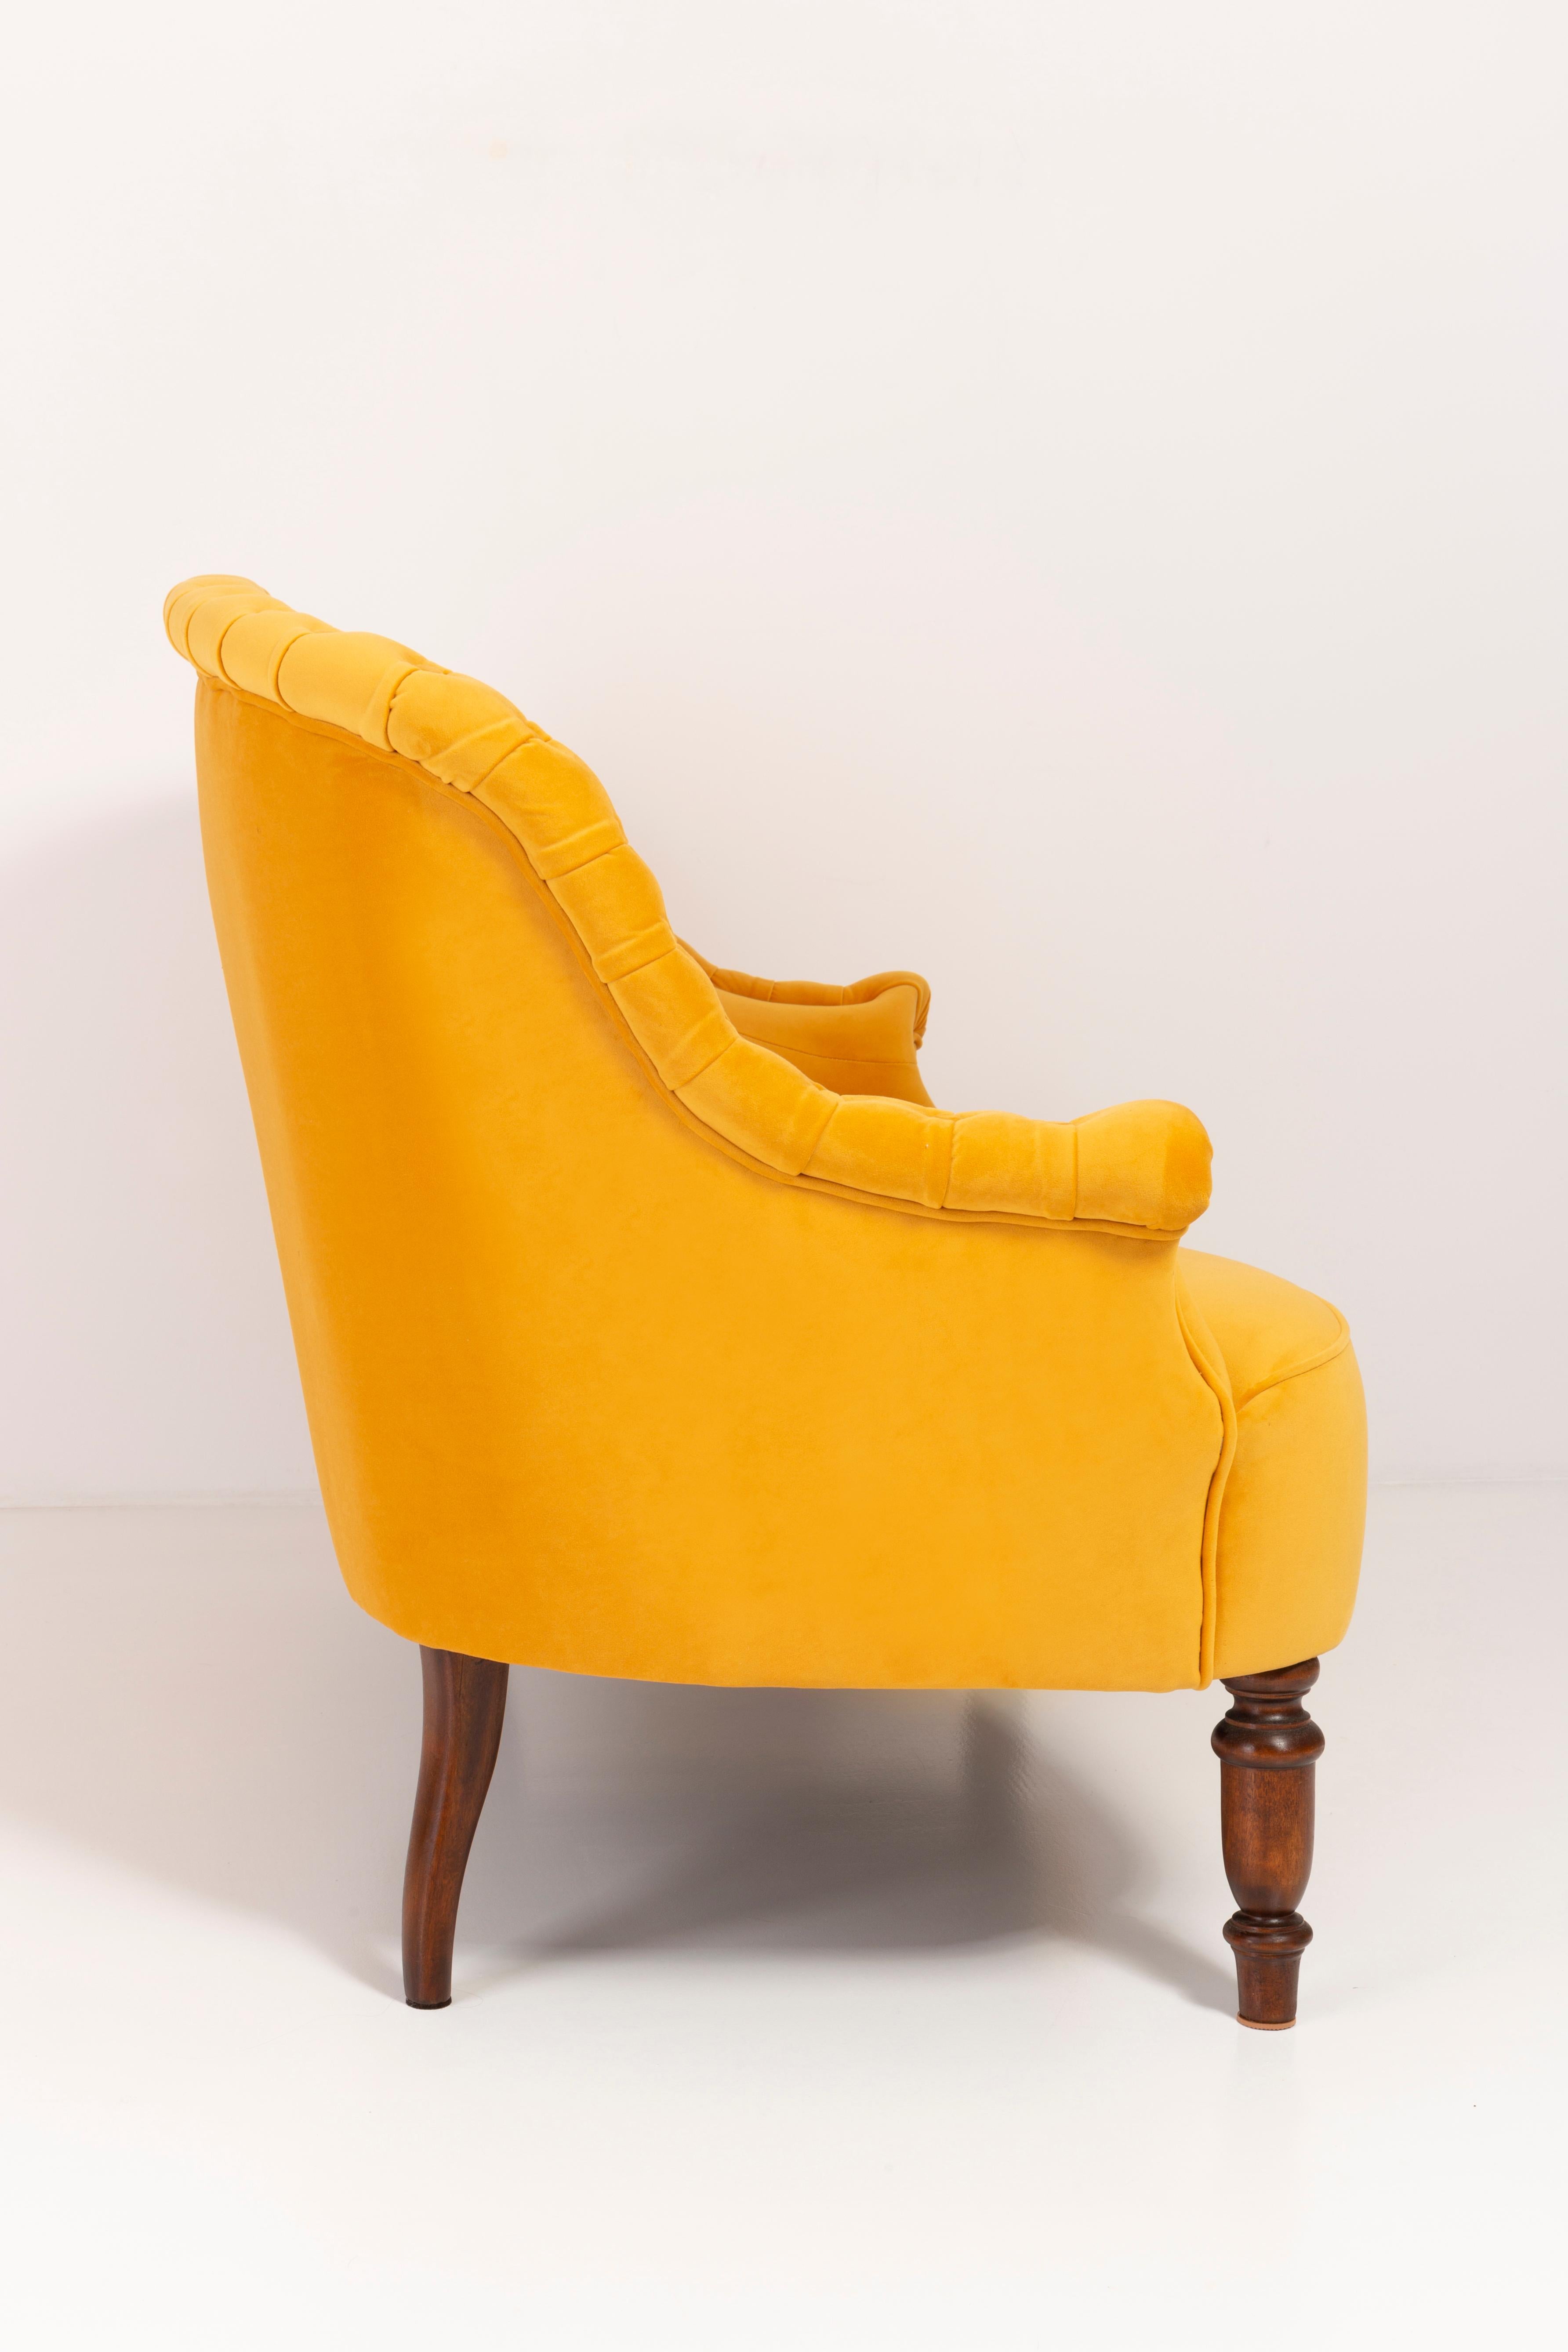 20th Century Sofa in Louis XVI Style Yellow Mustard, 1930s, Germany For Sale